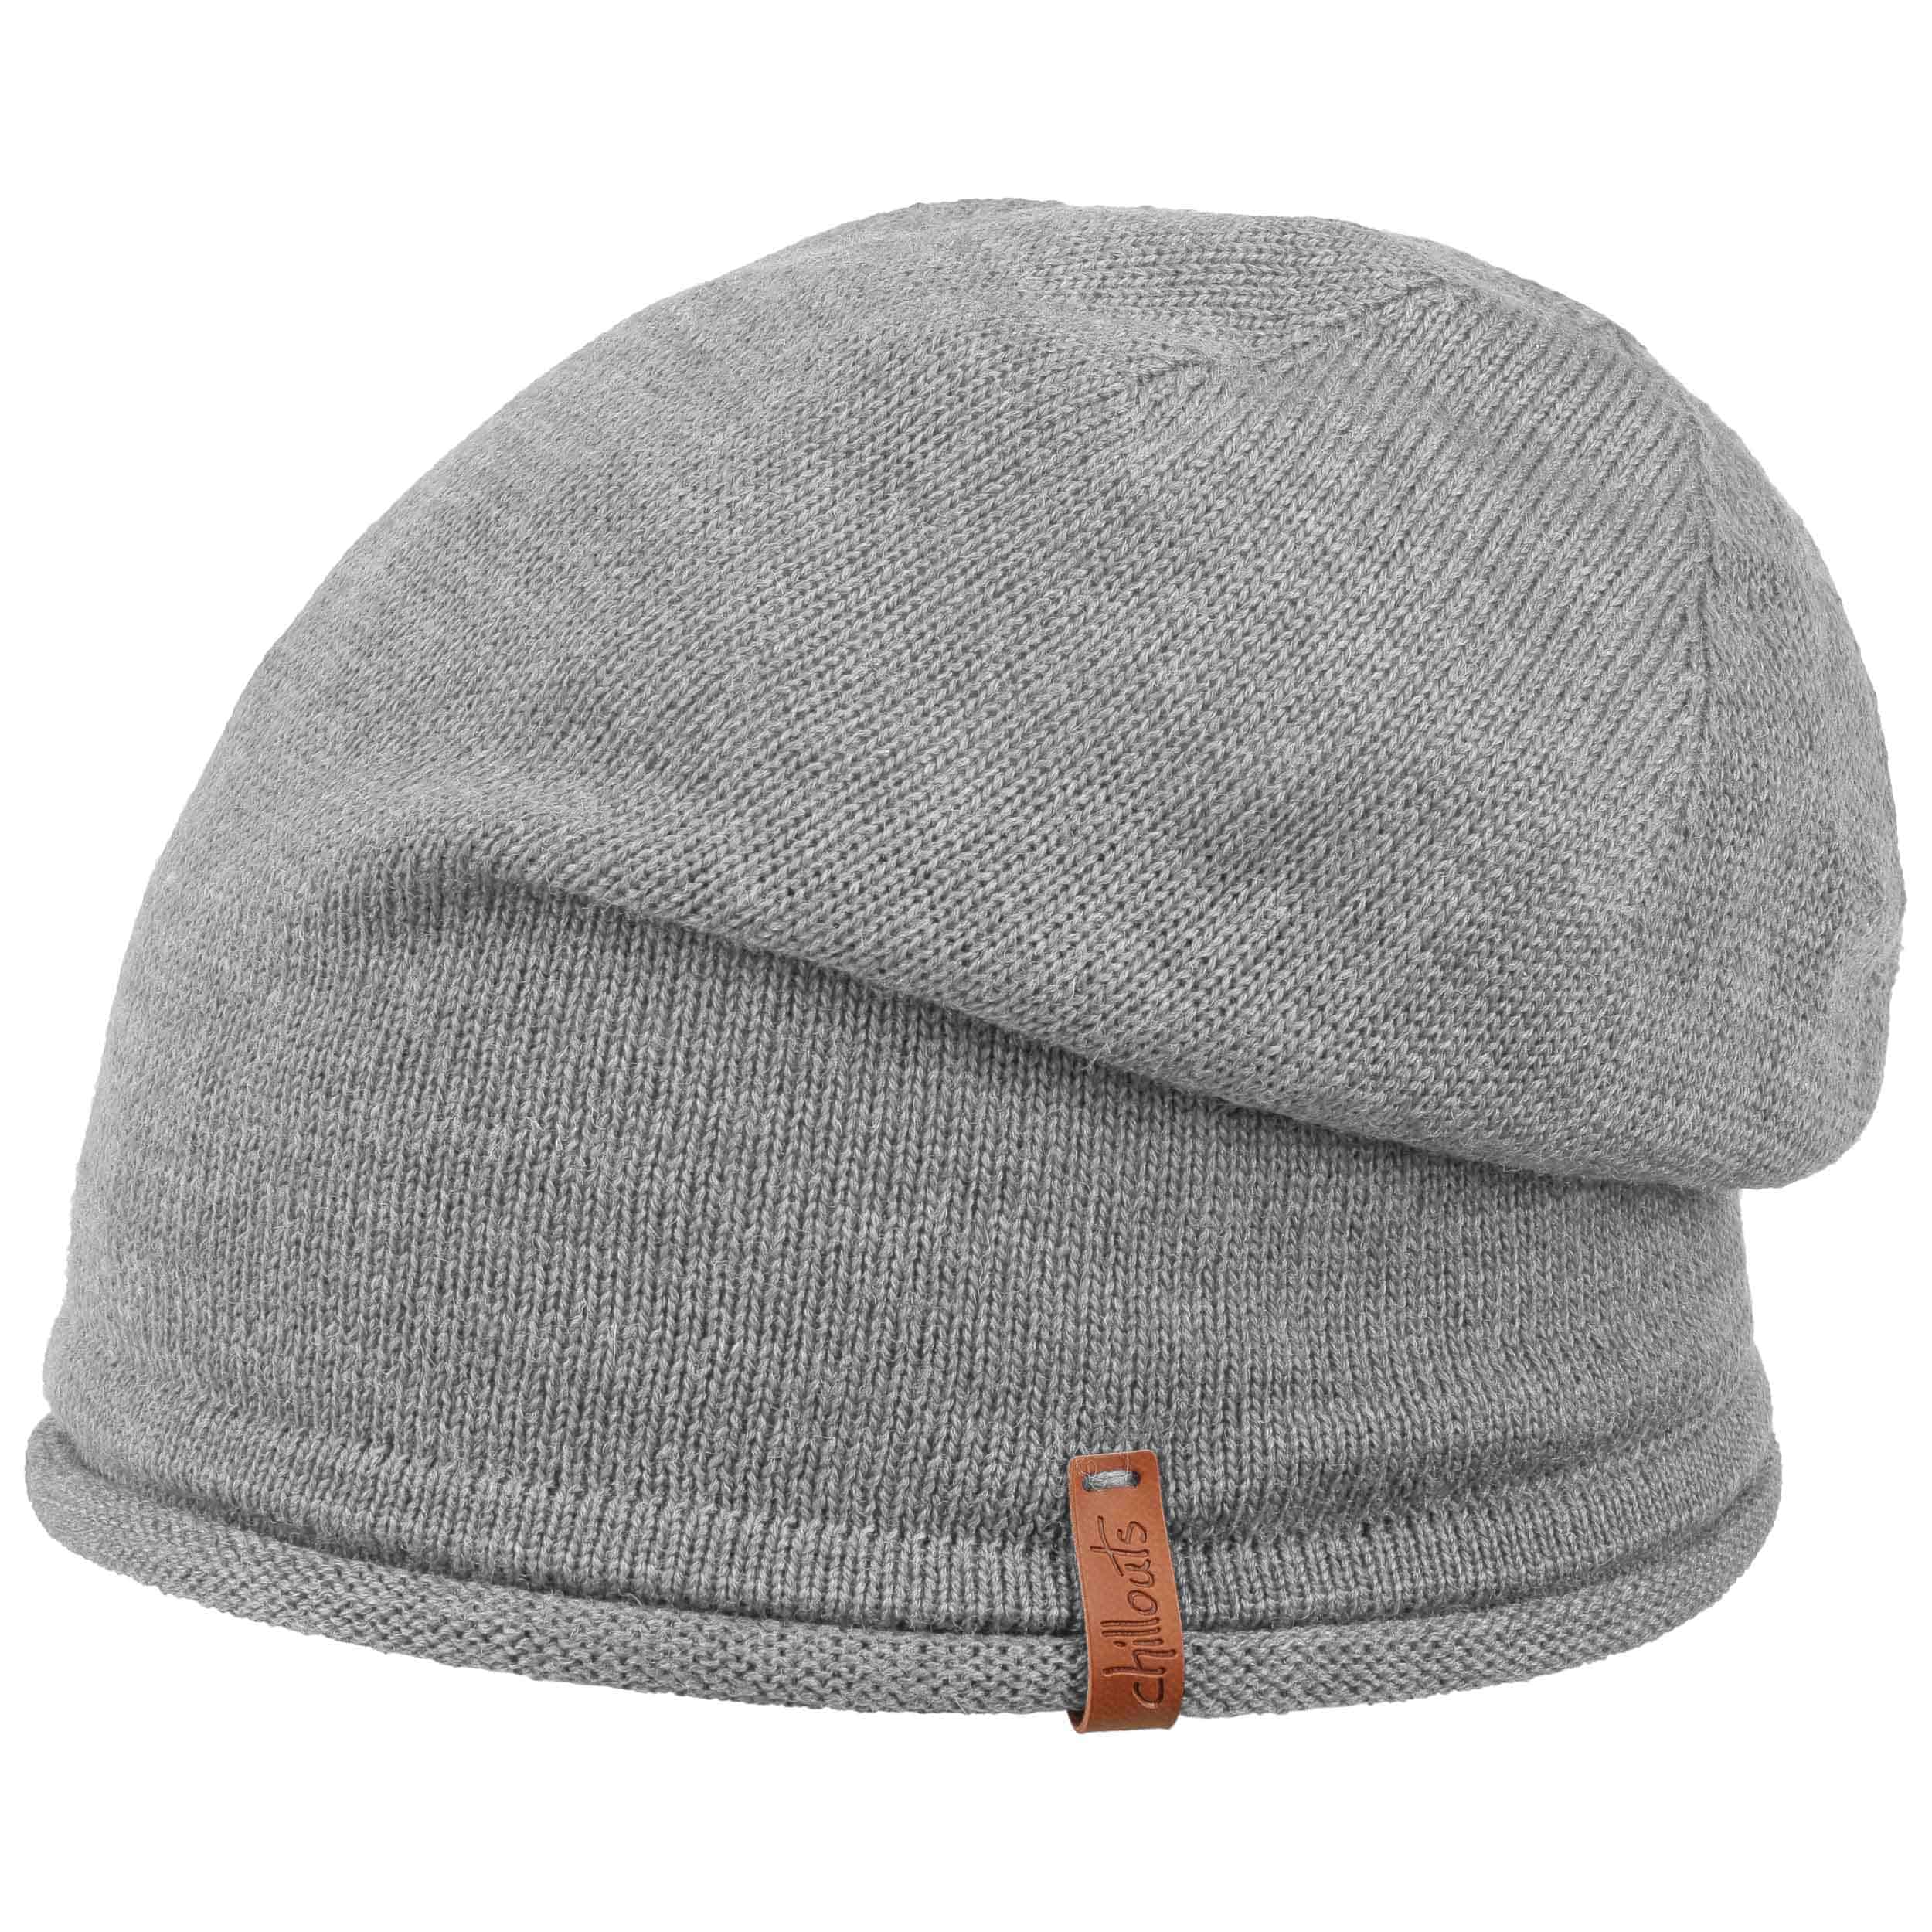 - 29,95 € by Oversize Leicester Beanie Chillouts